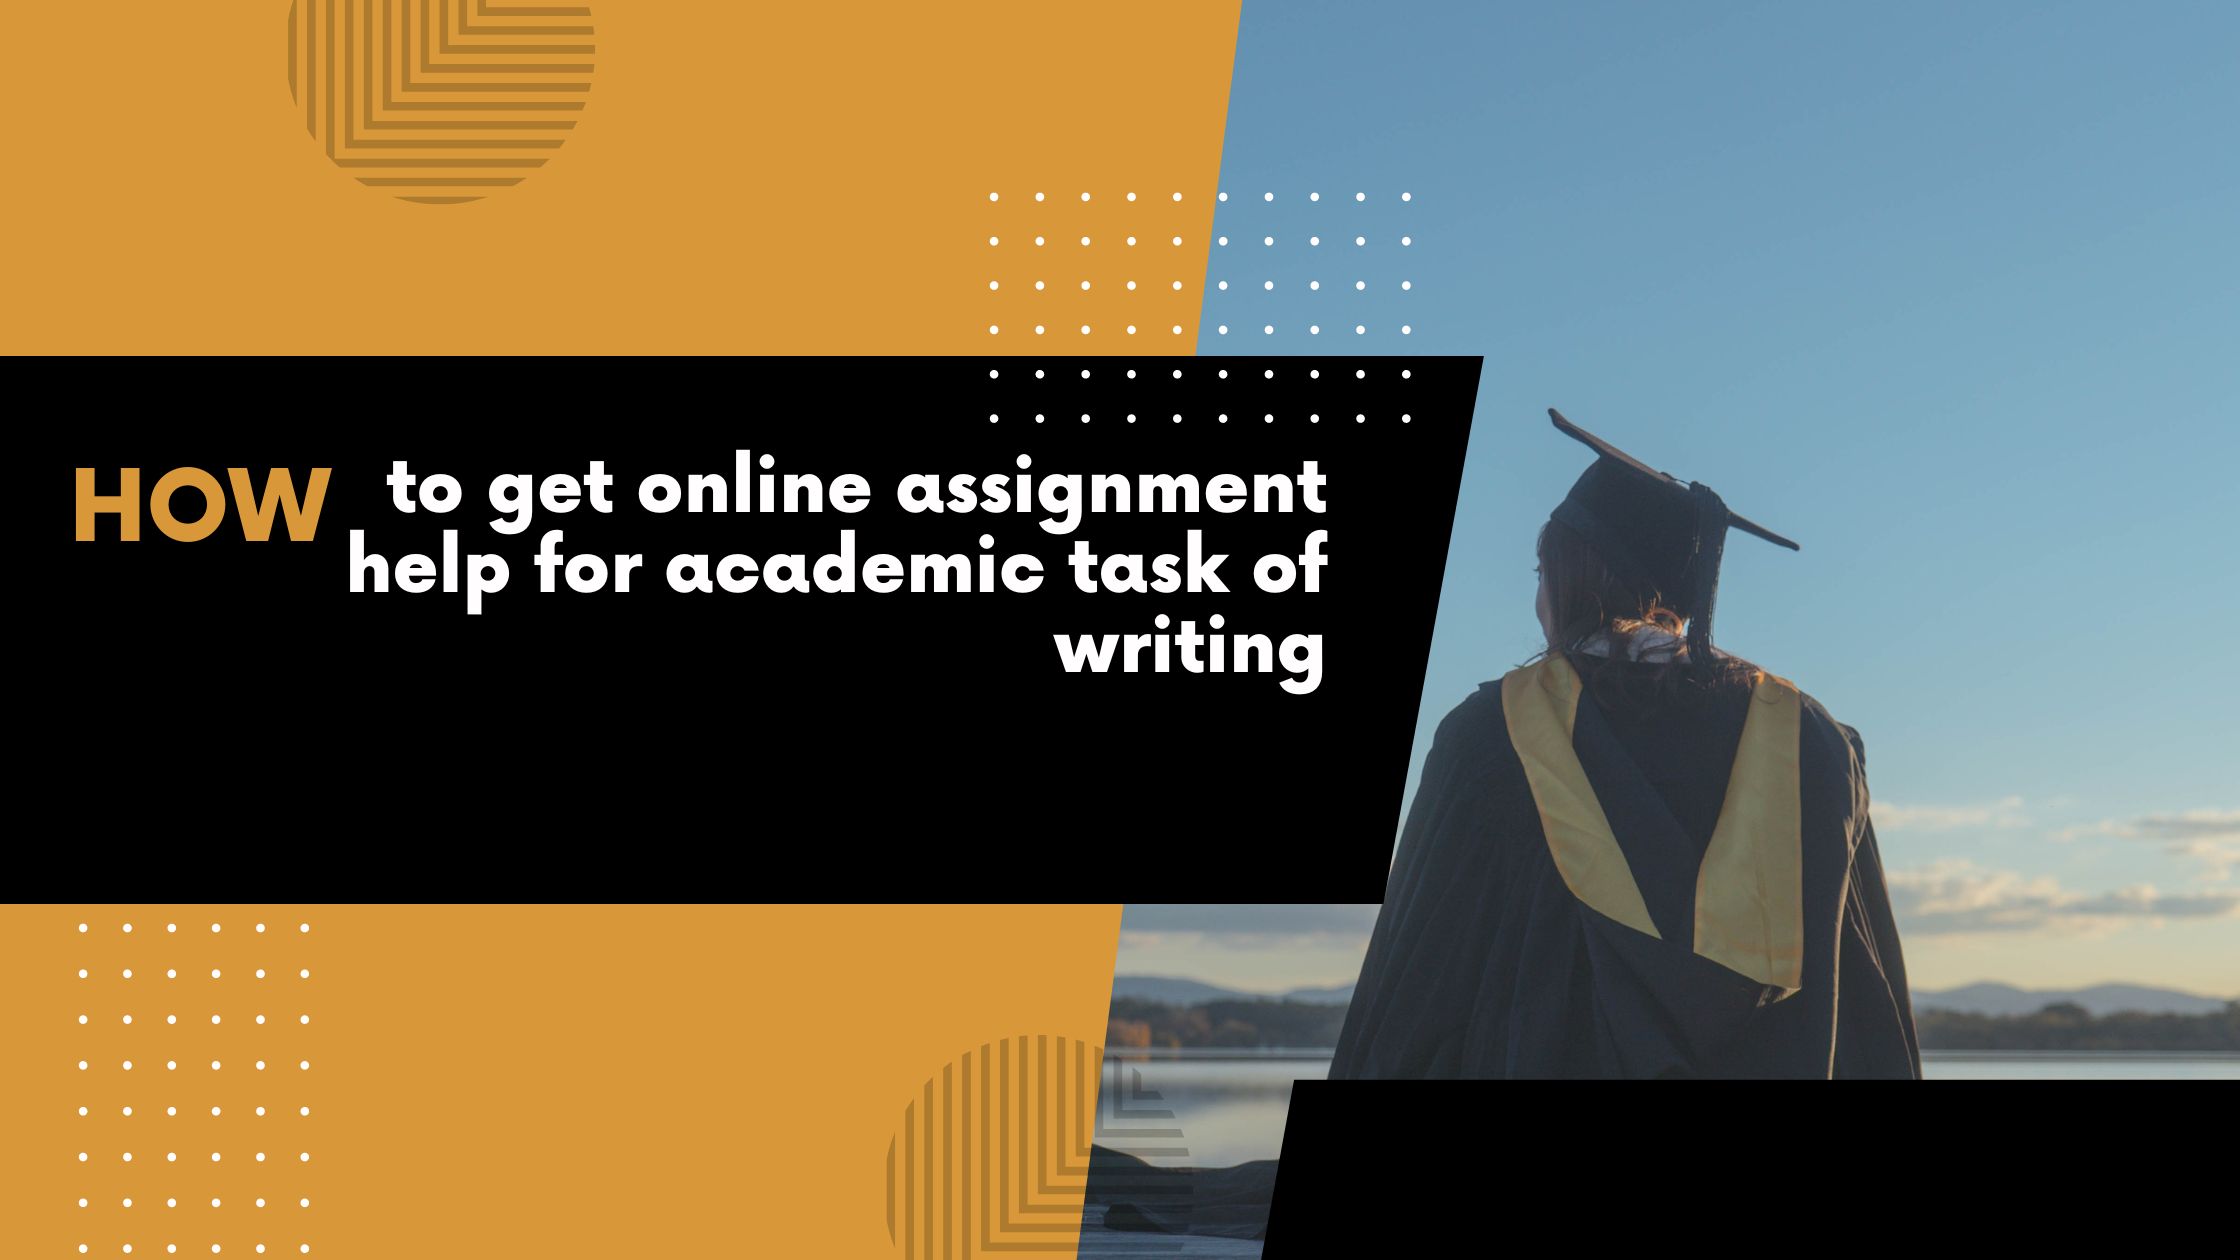 How to get online assignment help for academic task of writing